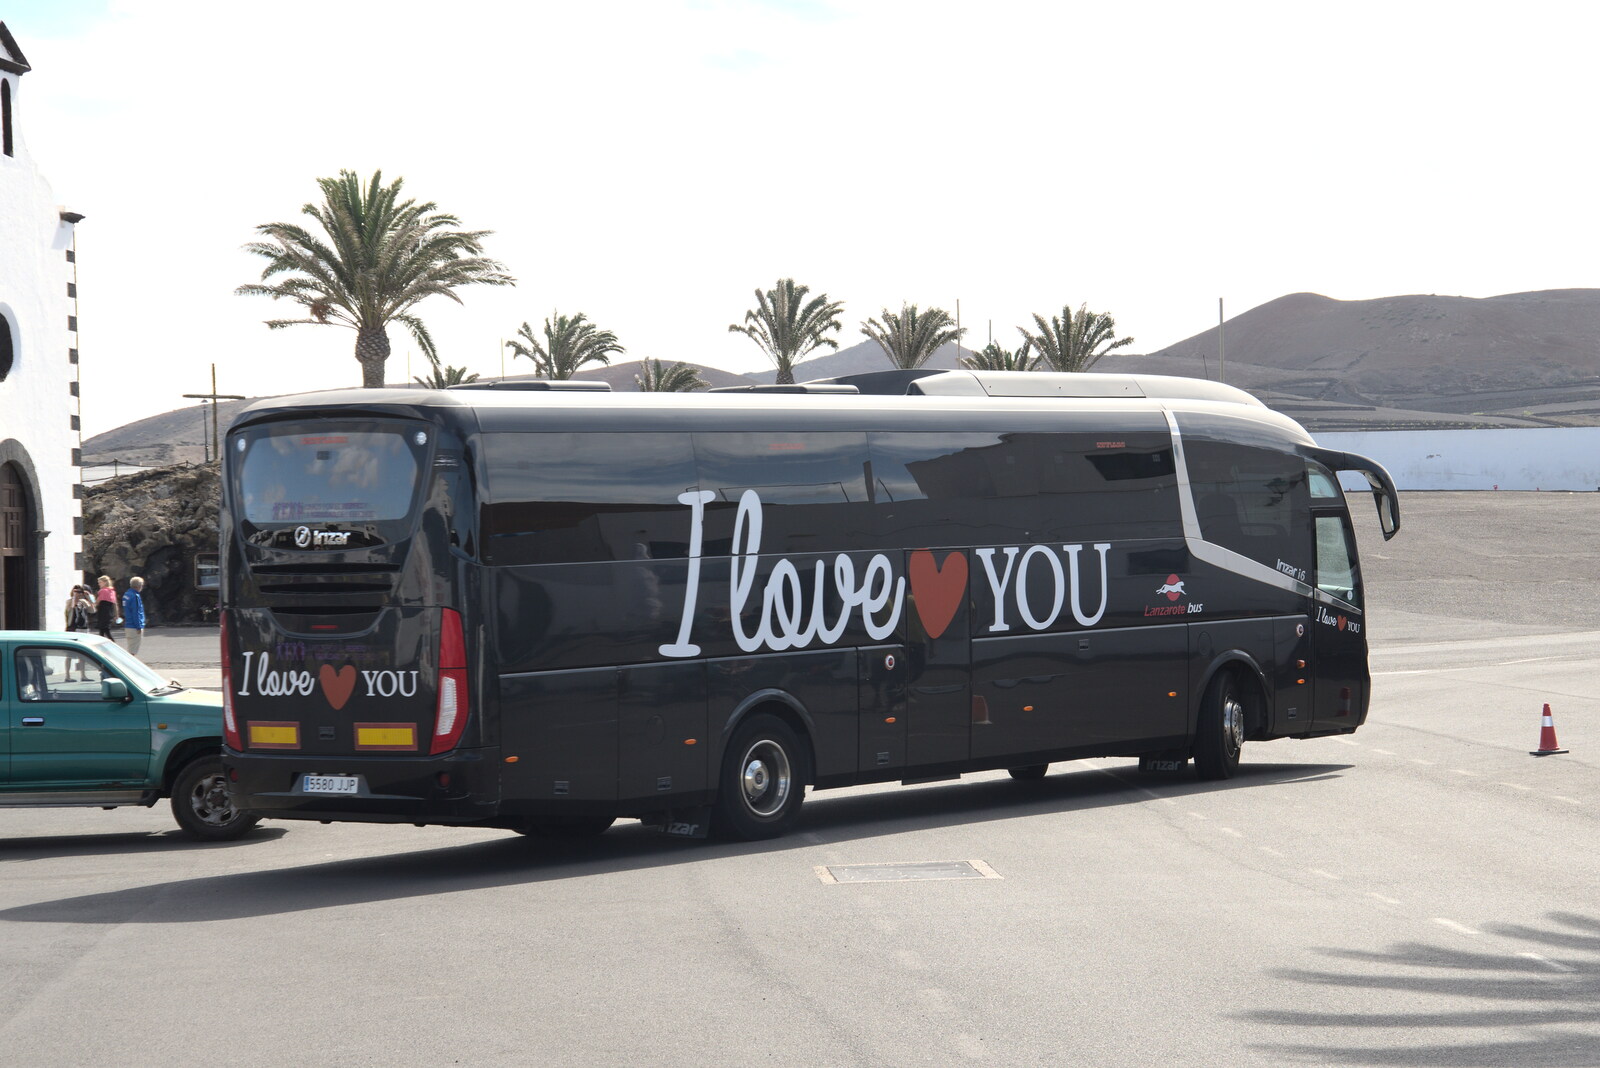 The 'I Love You' bus has been haunting us  from The Volcanoes of Lanzarote, Canary Islands, Spain - 27th October 2021